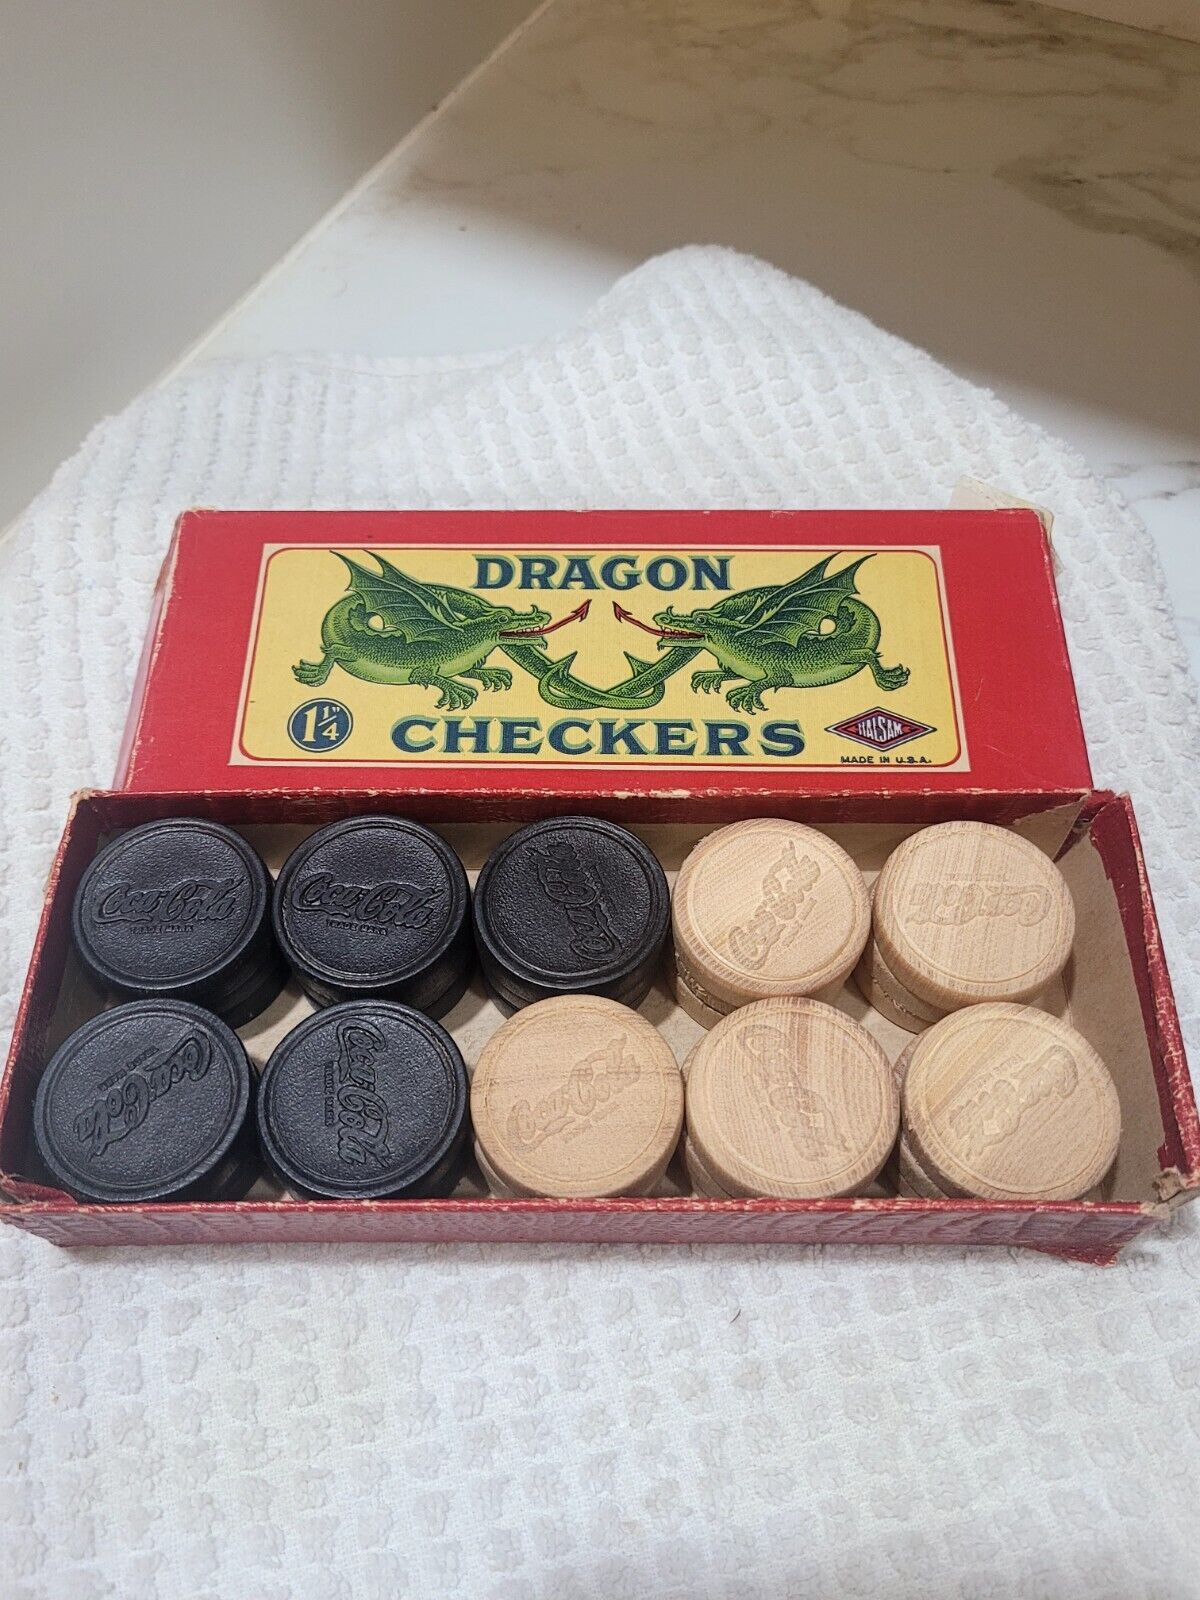 Vintage Coca Cola 1940's Dragon Checkers, Wood in The Box. Made in USA Very Cool